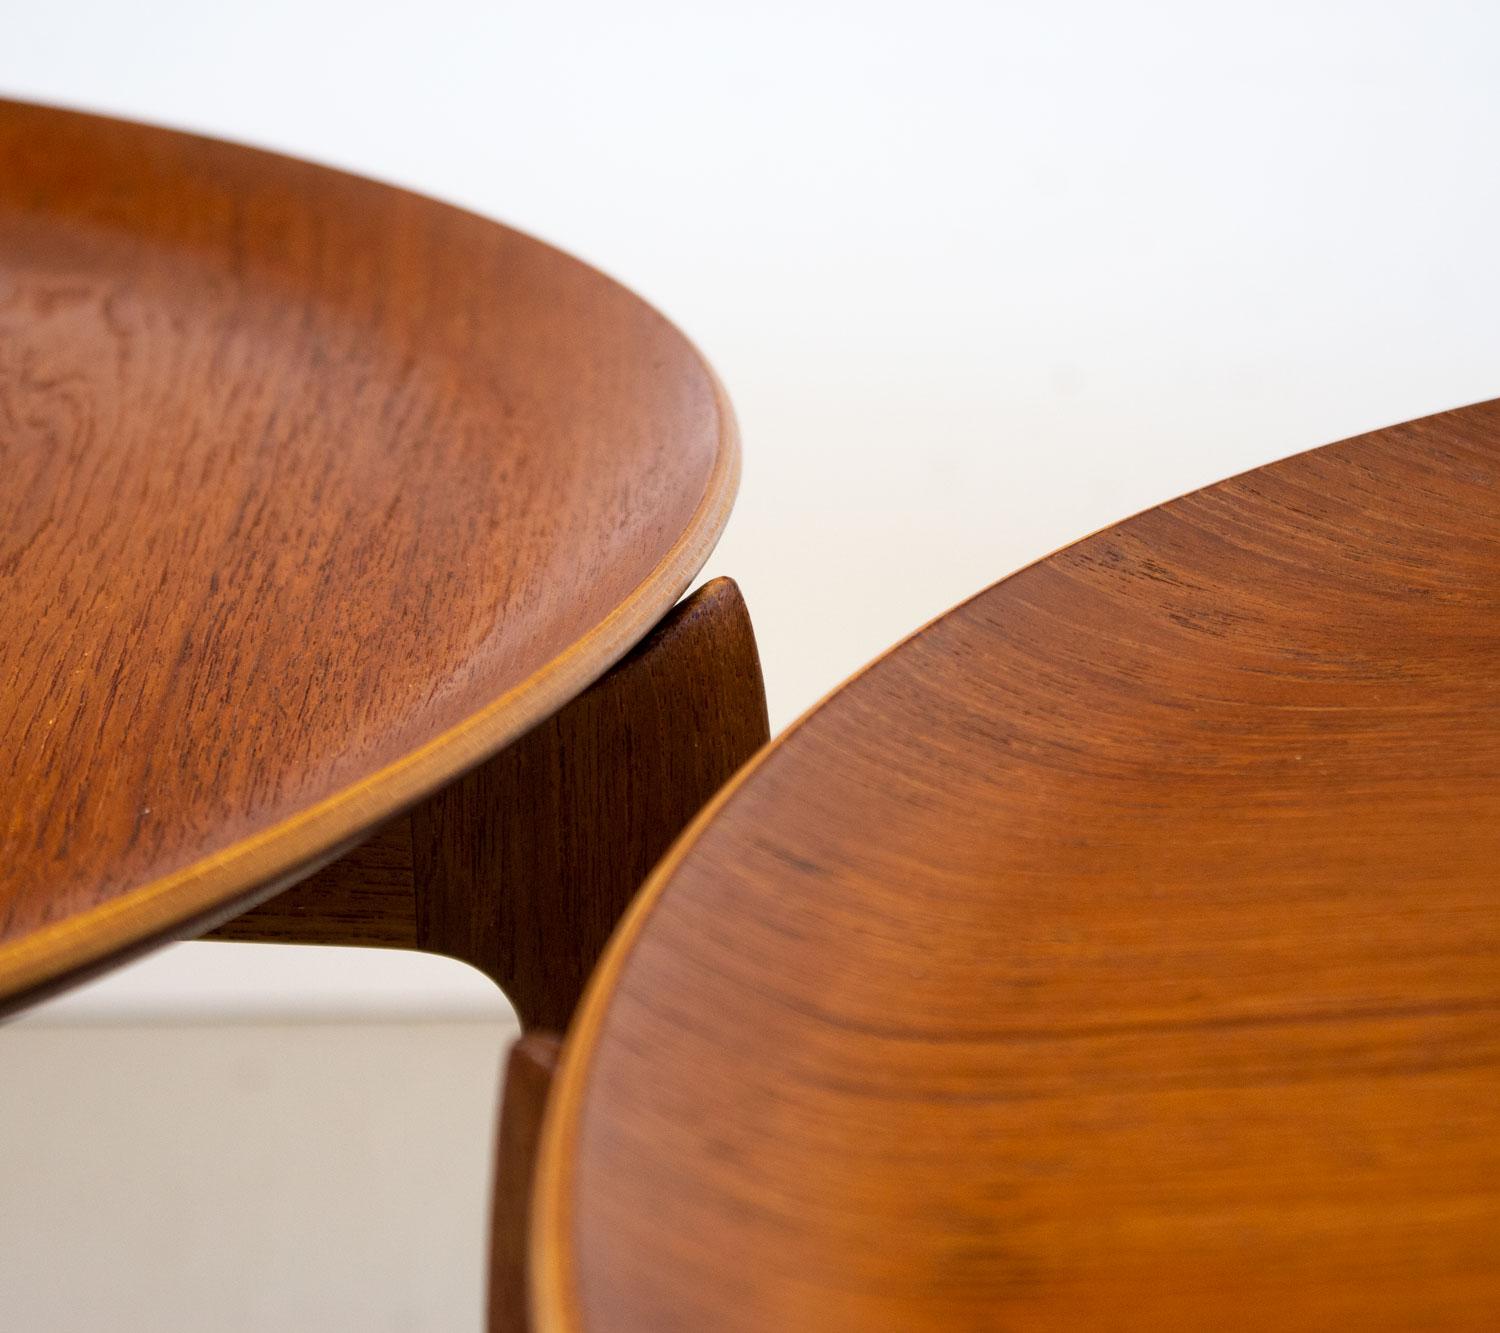 Pair of Danish teak model fh4508 tray tables designed by H. Engholm & Svend Åge Willumsen for Fritz Hansen in the 1950s. This clever and practical design features a tray as the table top made of curved teak veneered ply sitting on a sculpted teak